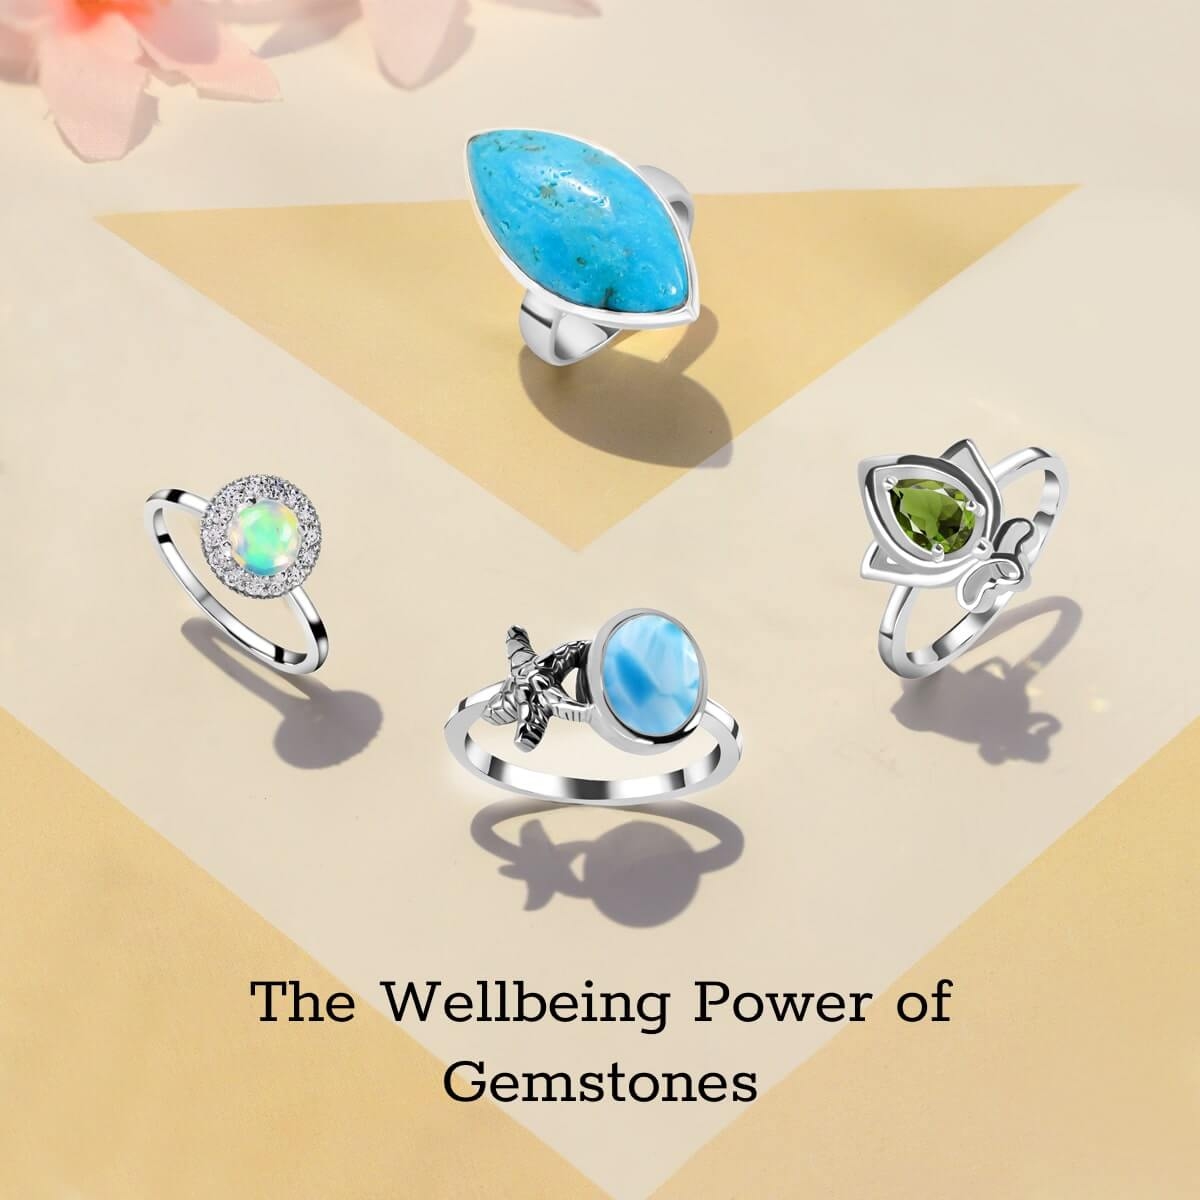 What are the Powers of Gemstones?